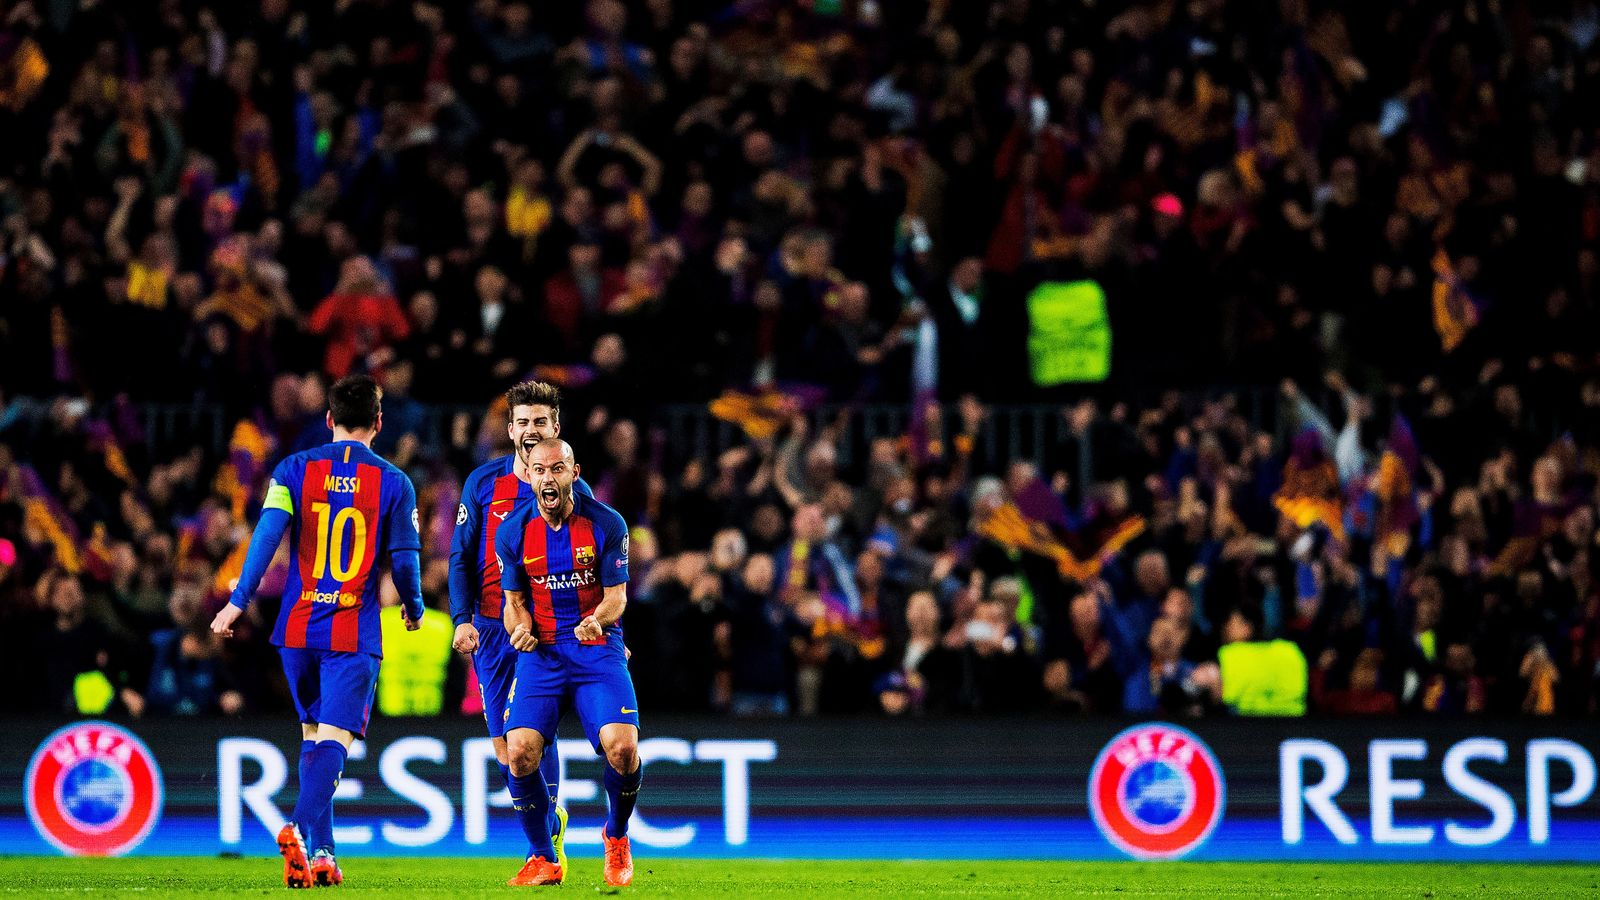 The Best Images And Social Media Reaction From Barcelona S Remarkable Champions League Victory Over Psg Football News Sky Sports